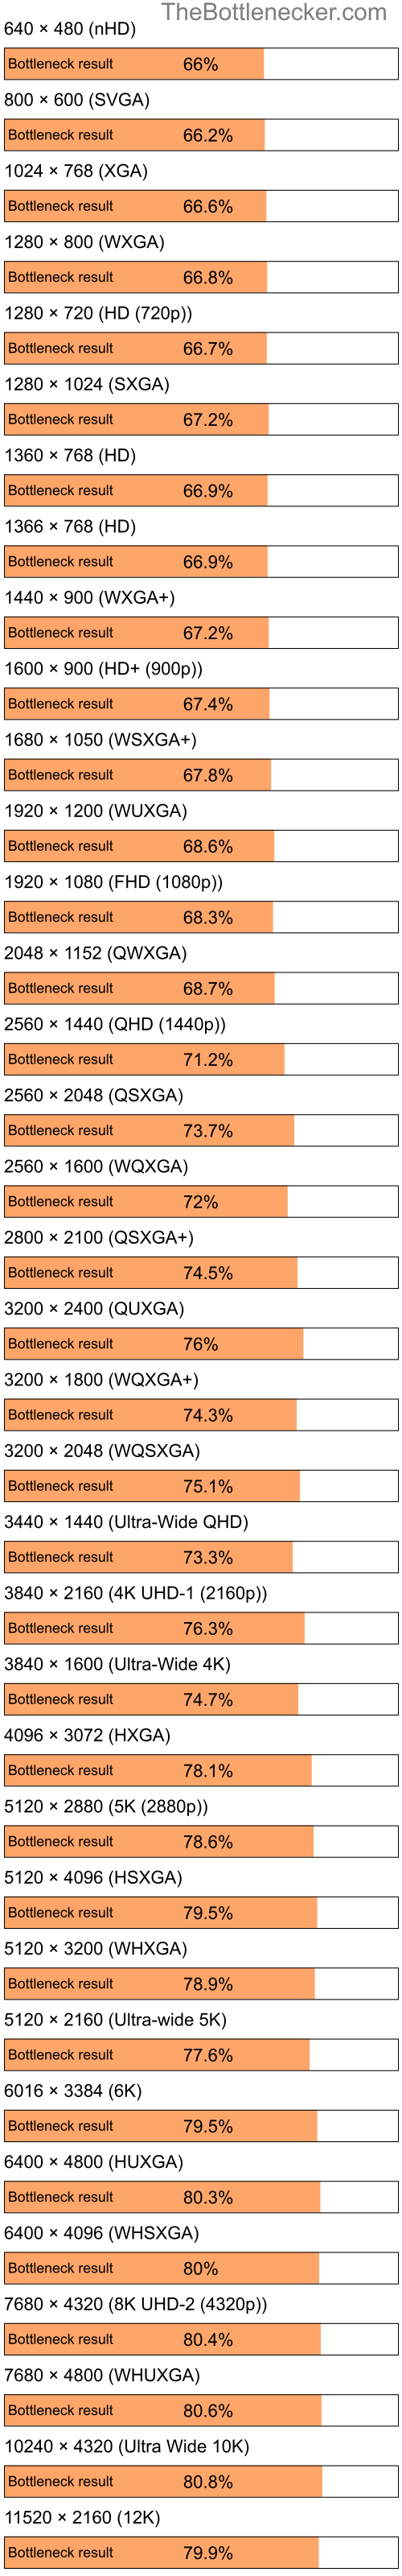 Bottleneck results by resolution for Intel Pentium 4 and NVIDIA GeForce 8600M GS in General Tasks